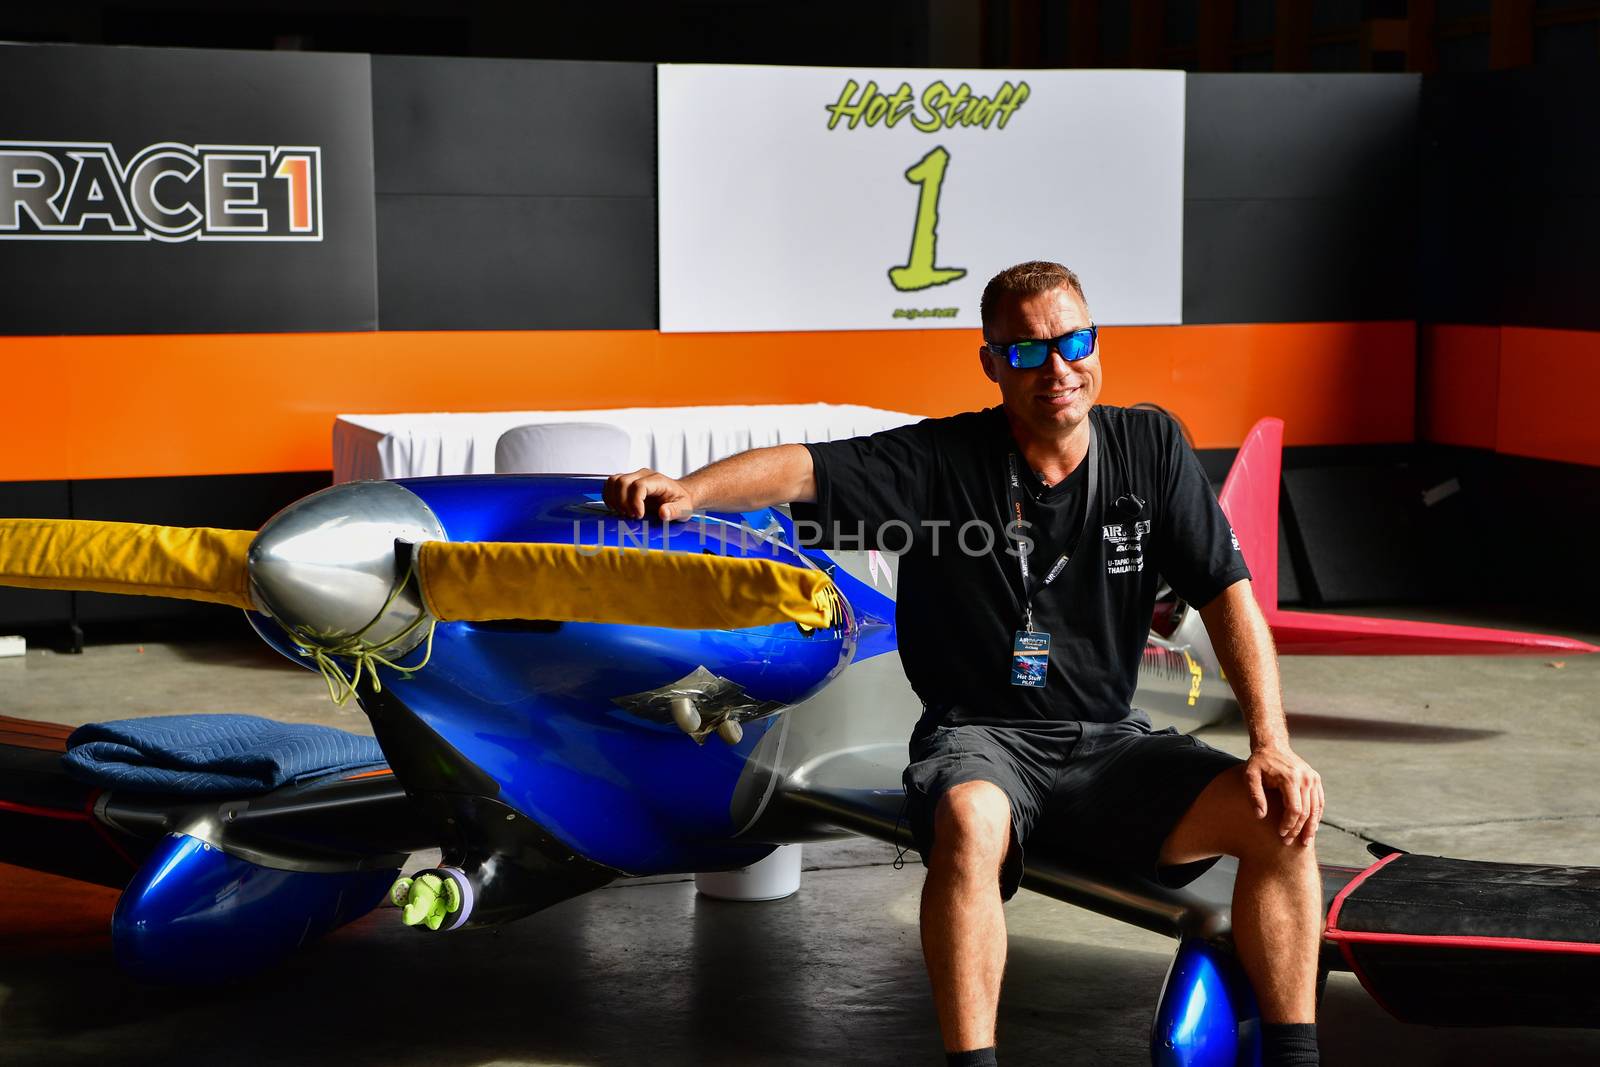 CHONBURI - NOVEMBER 20 : Thom Richard pilot of Sweden with Reberry 3M1C1R aircraft in Air Race 1 Thailand at U-Tapao International Airport on November 20, 2016 in Chonburi, Thailand.